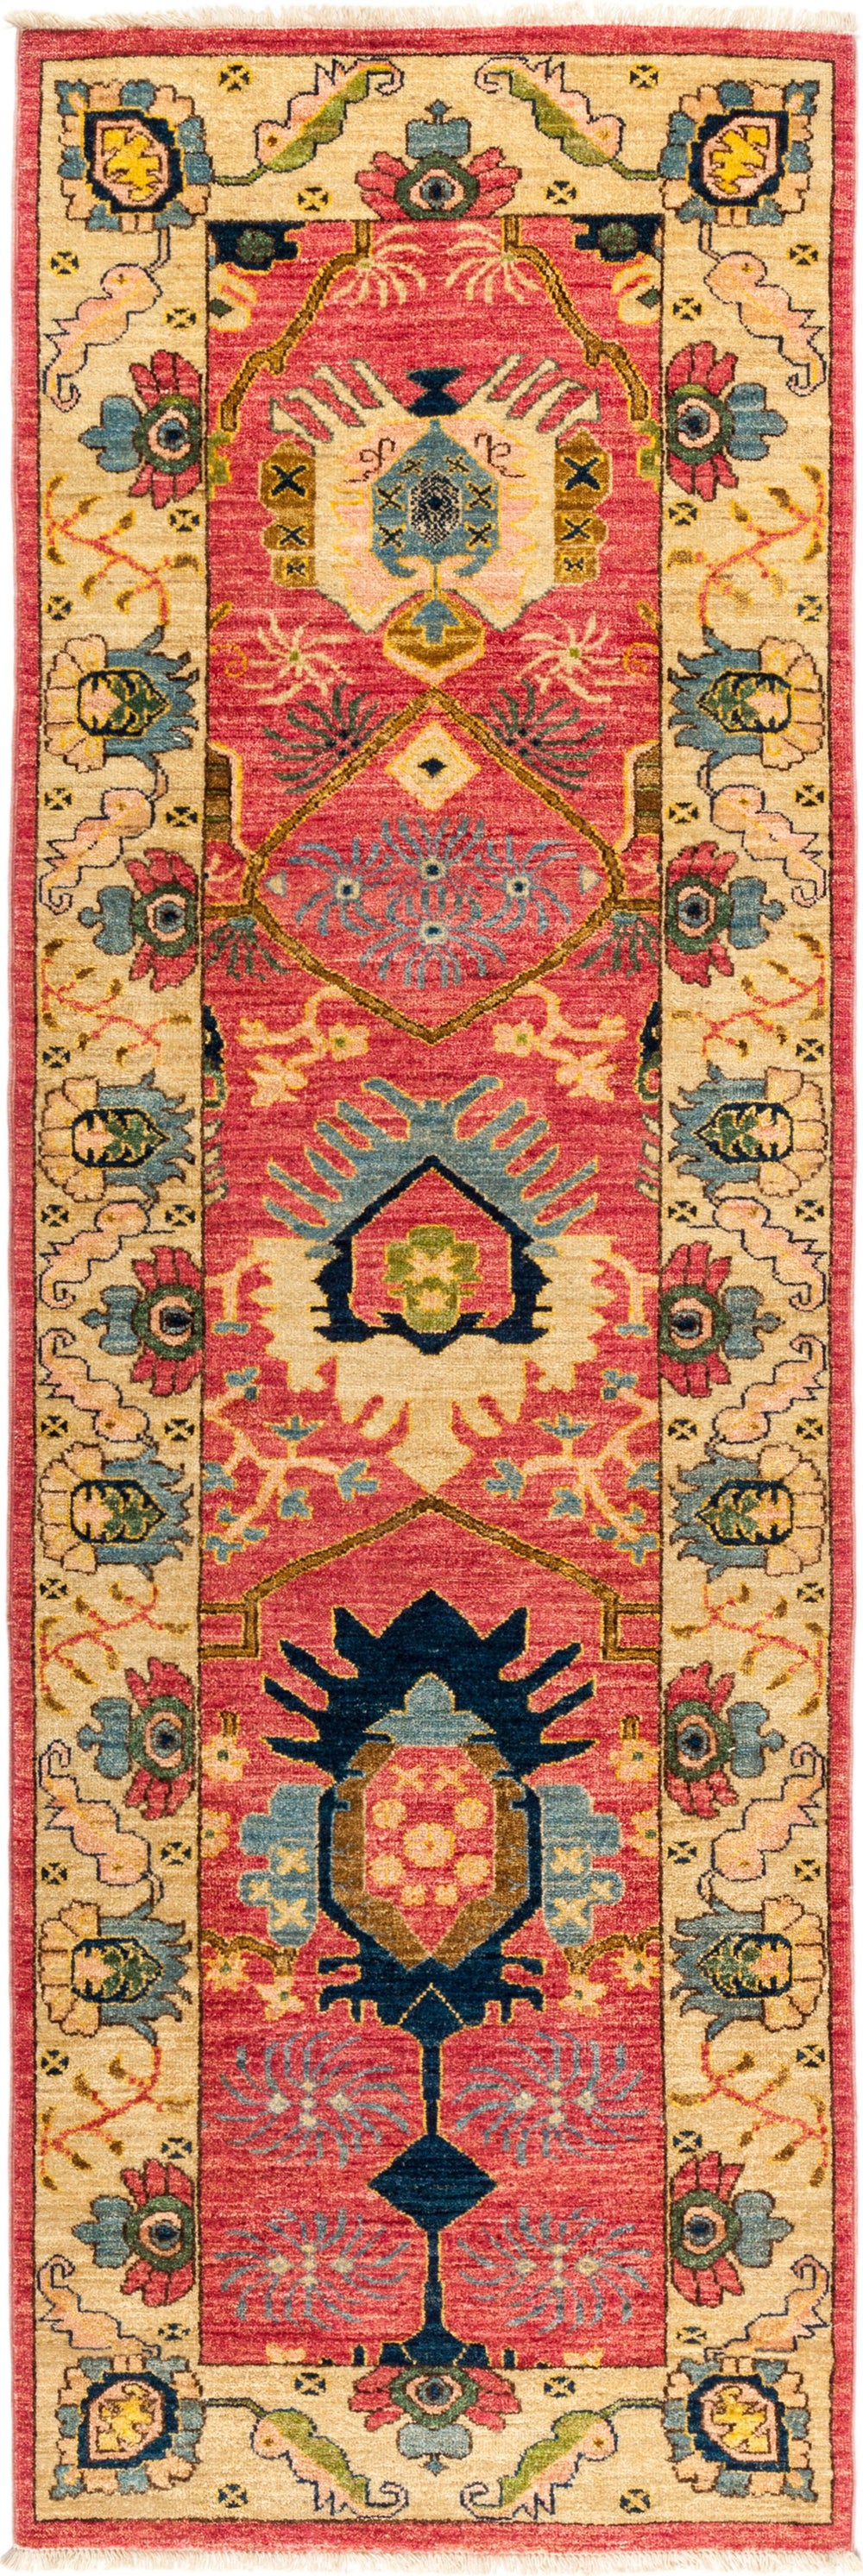 Eclectic, Red Wool Runner Rug - 2' 7" x 8' 2"